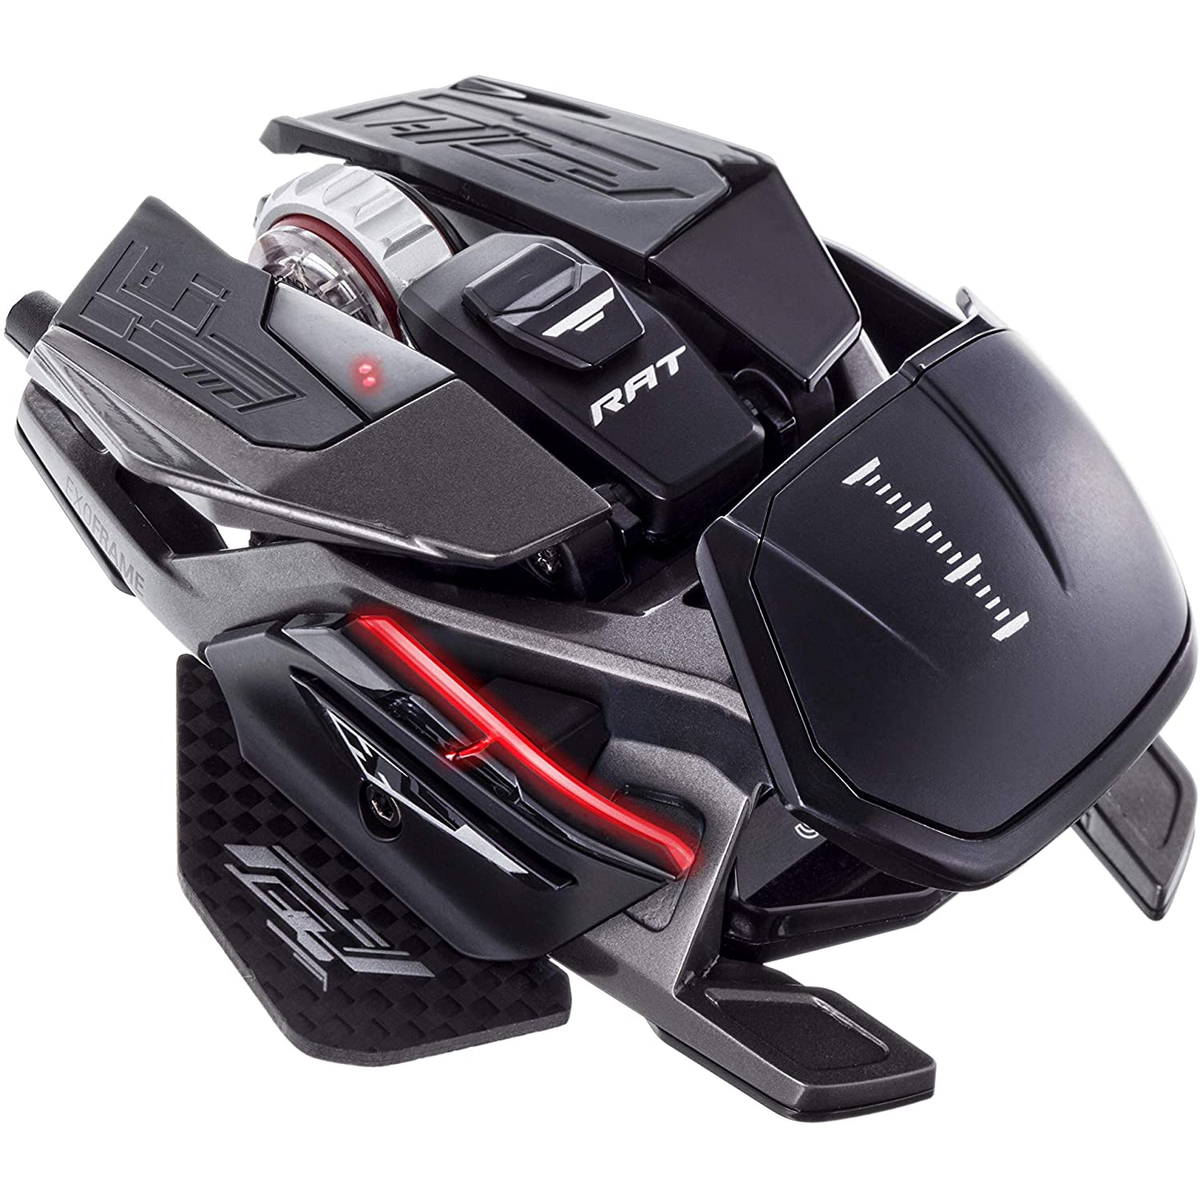 MAD CATZ MR05DCINBL001-0 black PERFORMANCE X3 MOUSE GAM. HIGH Maus, Gaming BL